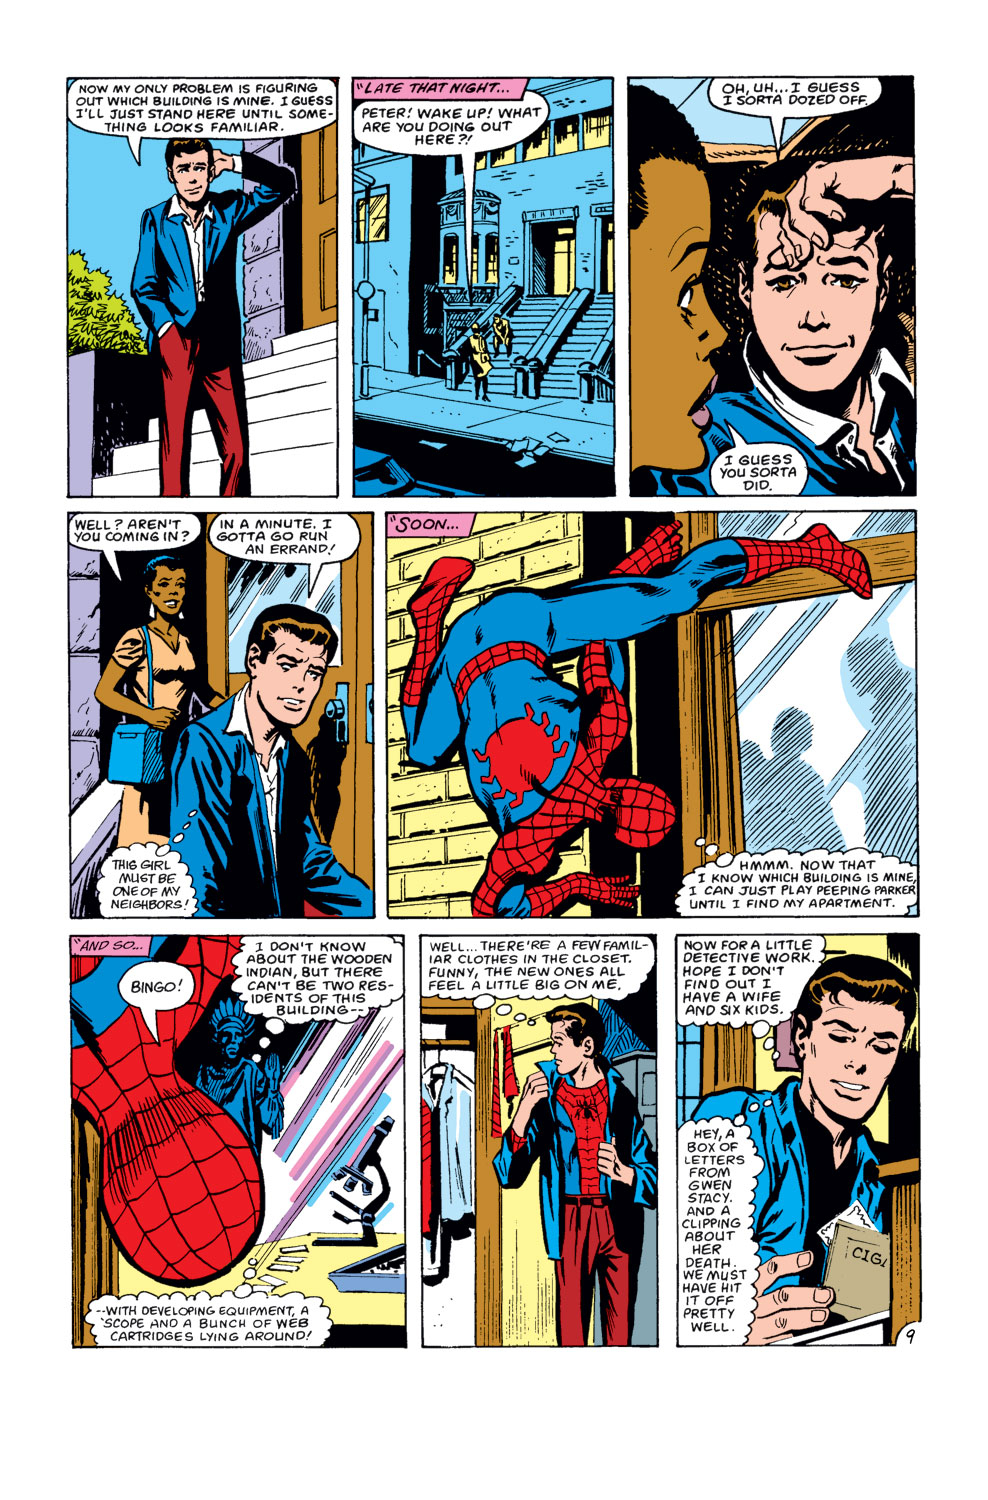 What If? (1977) issue 30 - Spider-Man's clone lived - Page 10